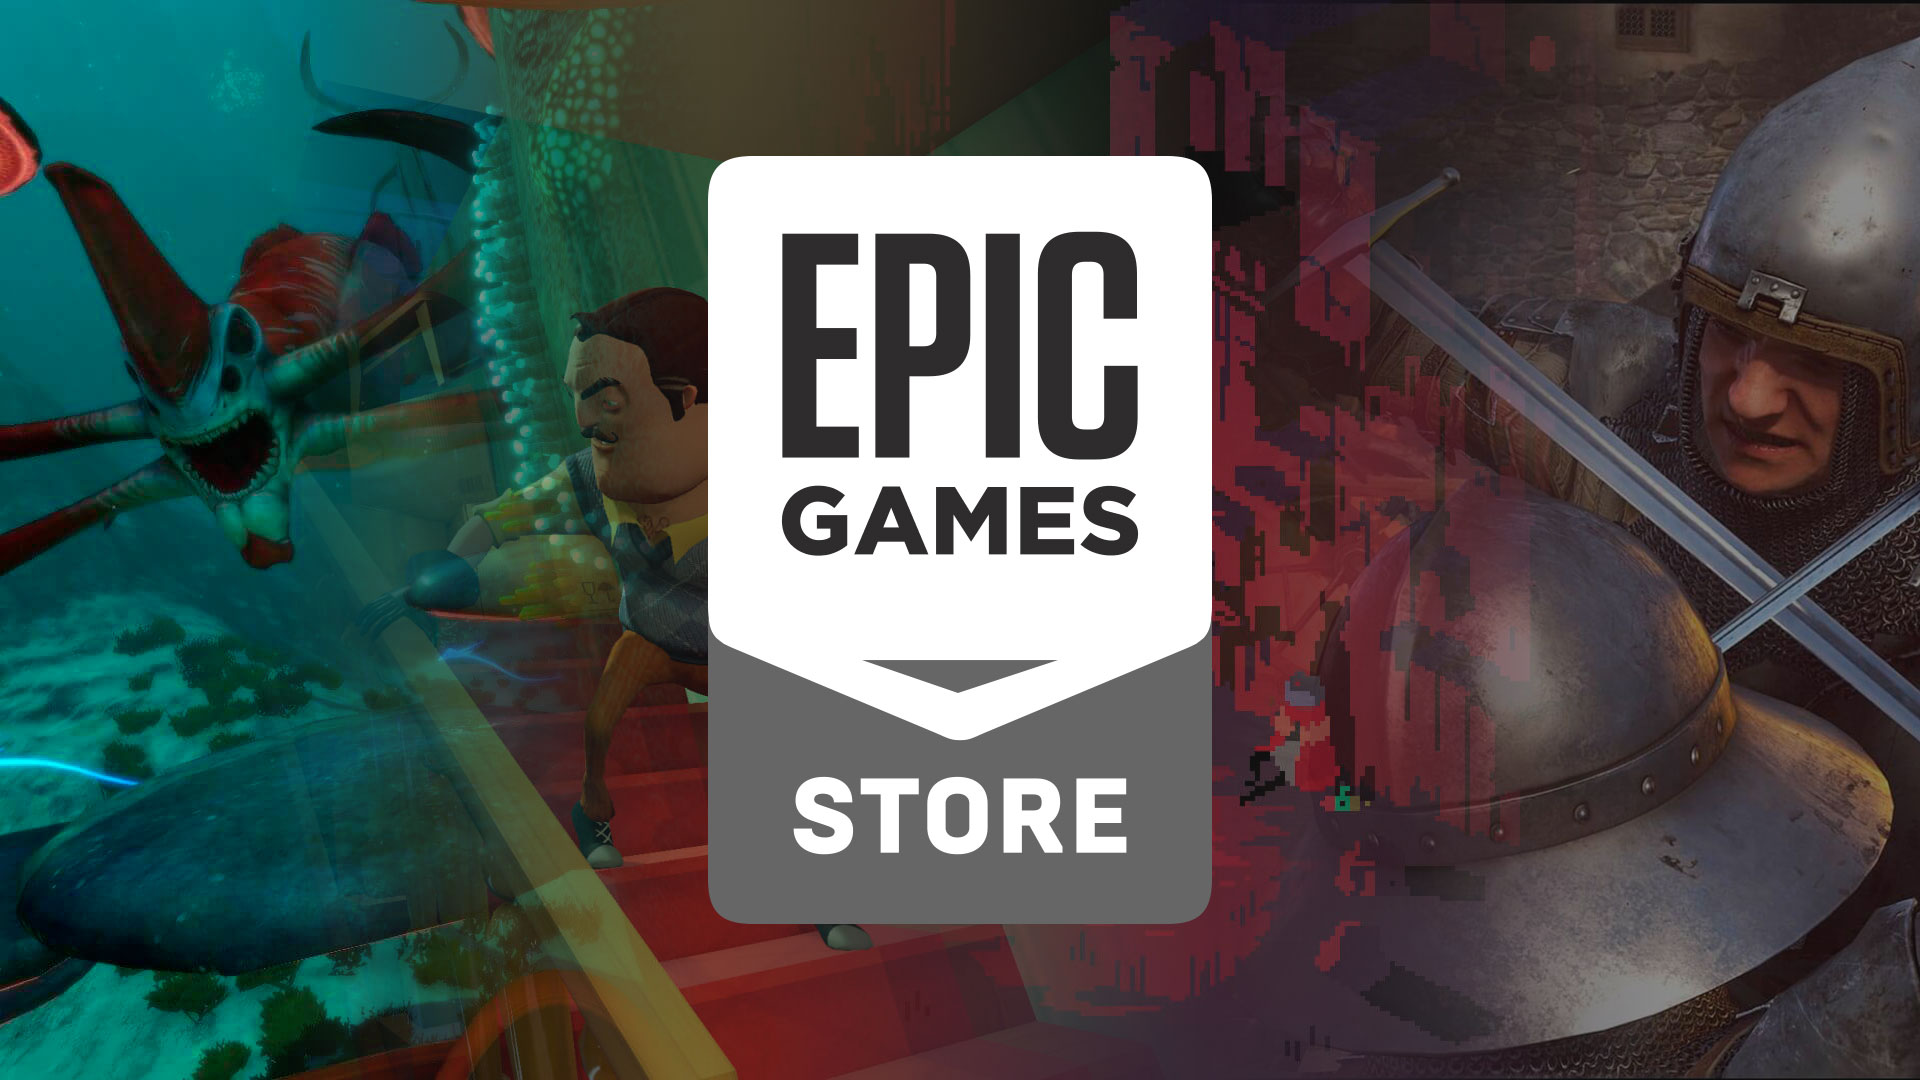 Next week’s free games from Epic have been revealed